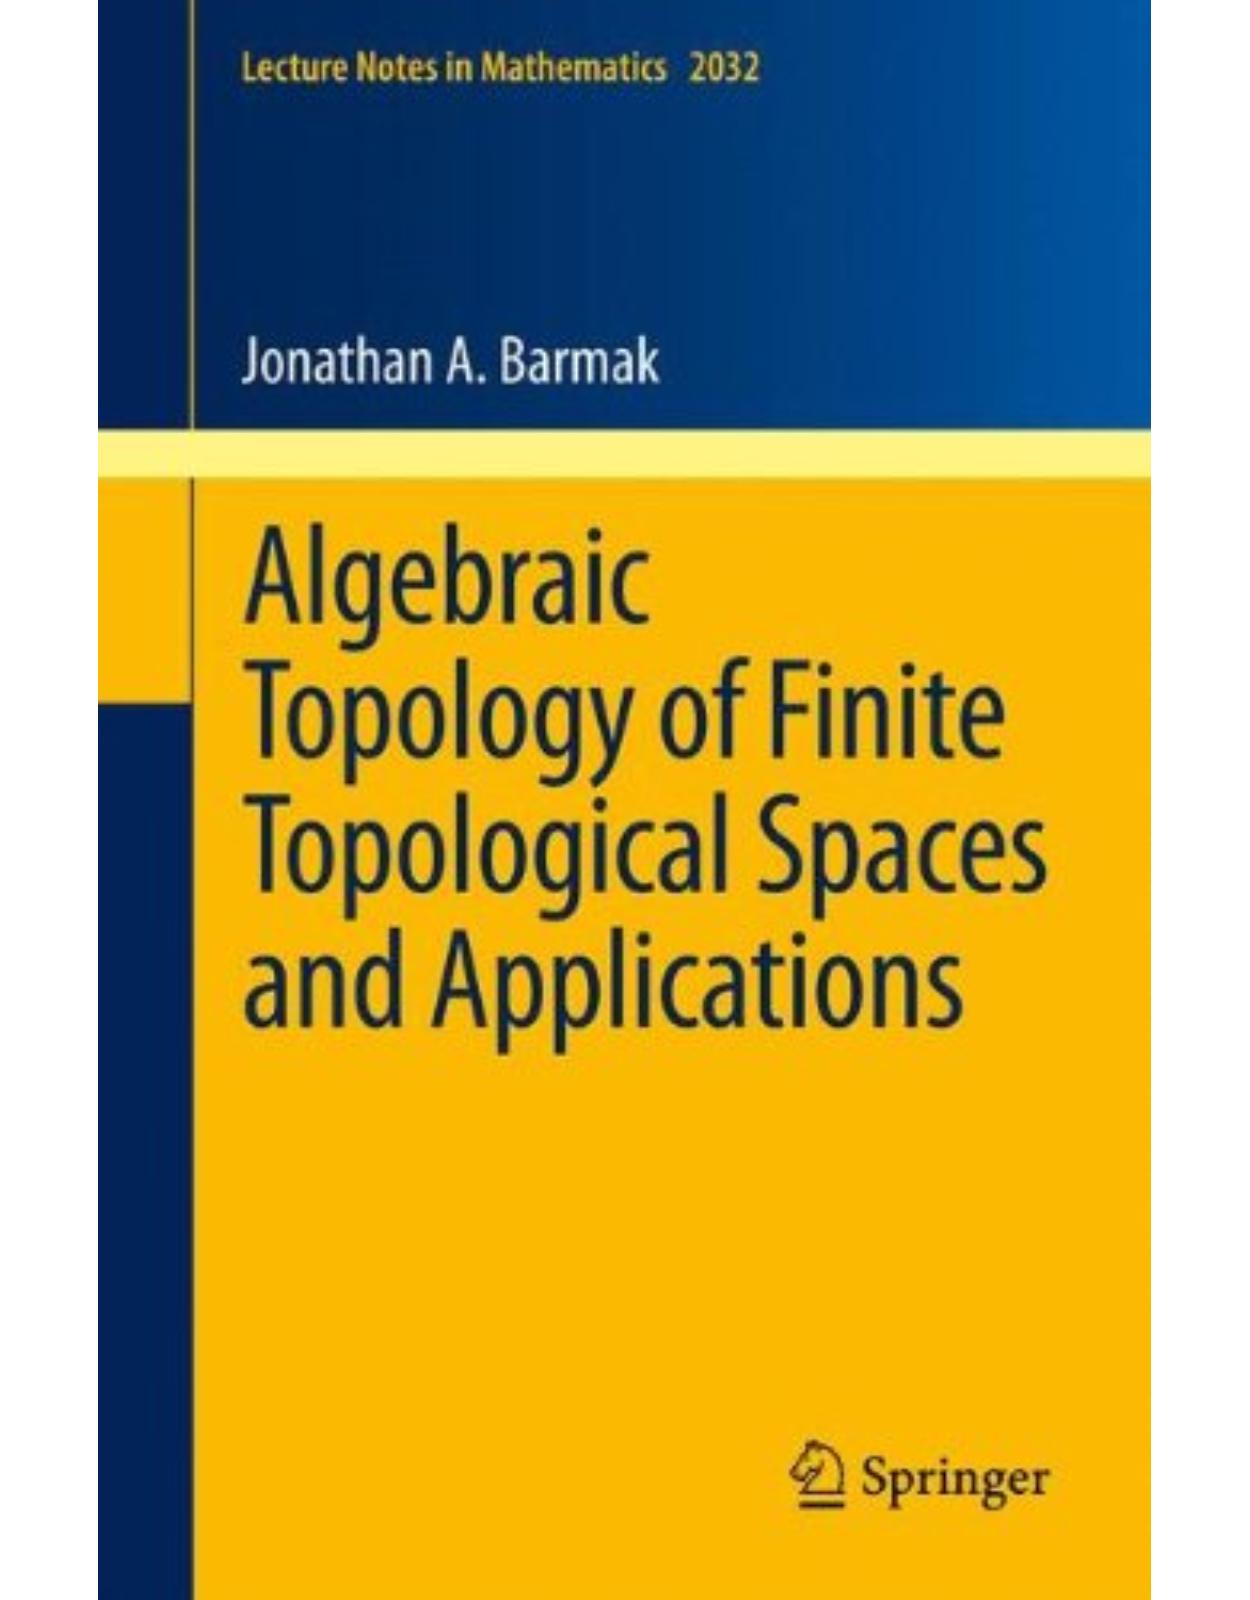 Algebraic Topology of Finite Topological Spaces and Applications (Lecture Notes in Mathematics) 